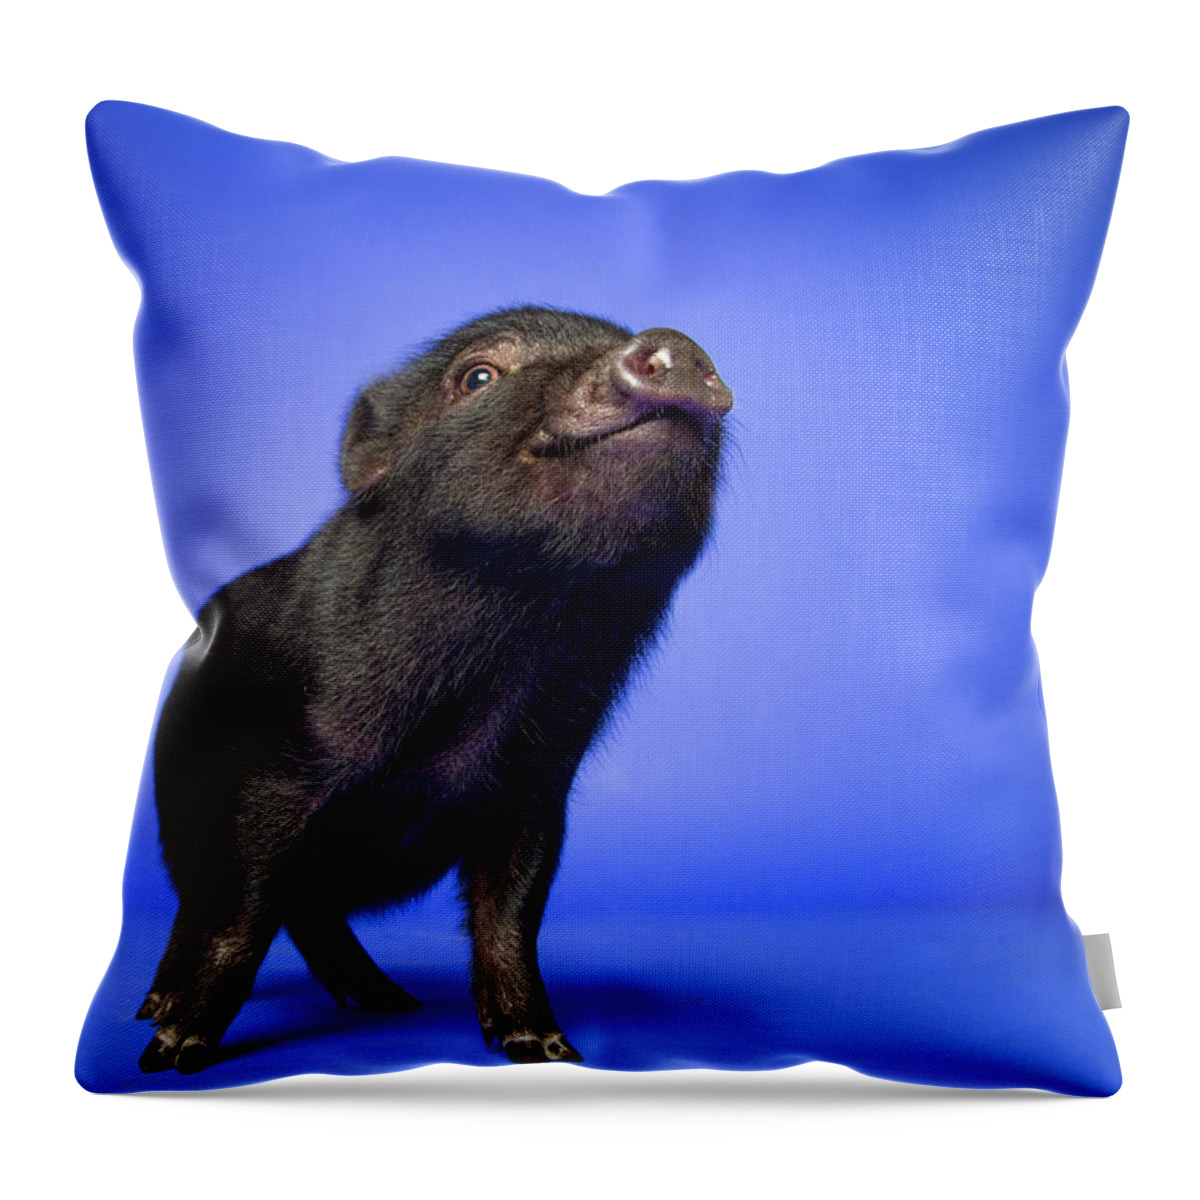 Pig Throw Pillow featuring the photograph A Happy Pig by Square Dog Photography